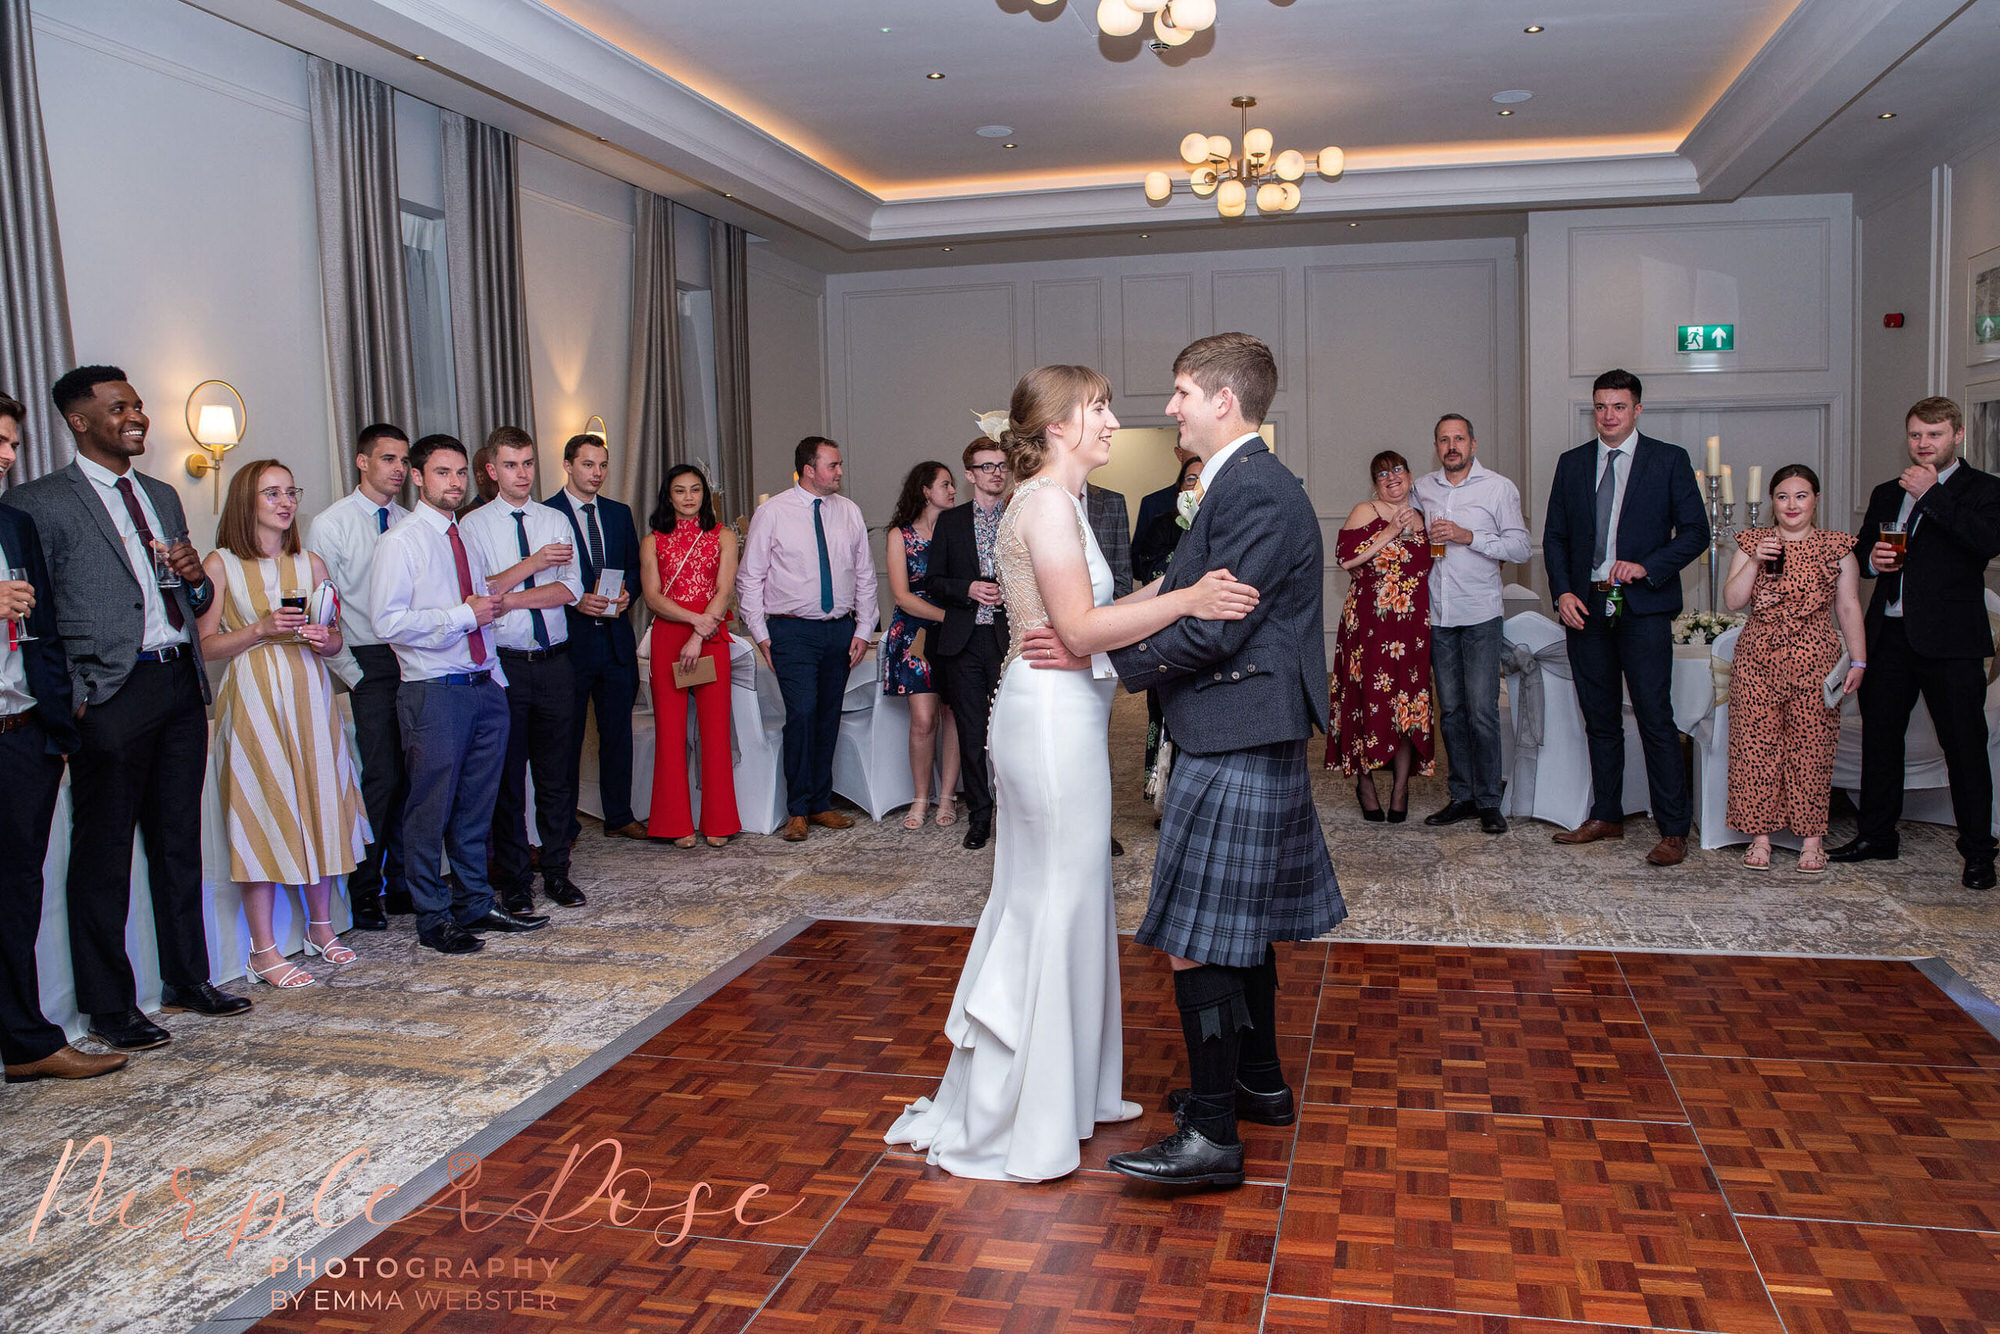 Brides and grooms first dance